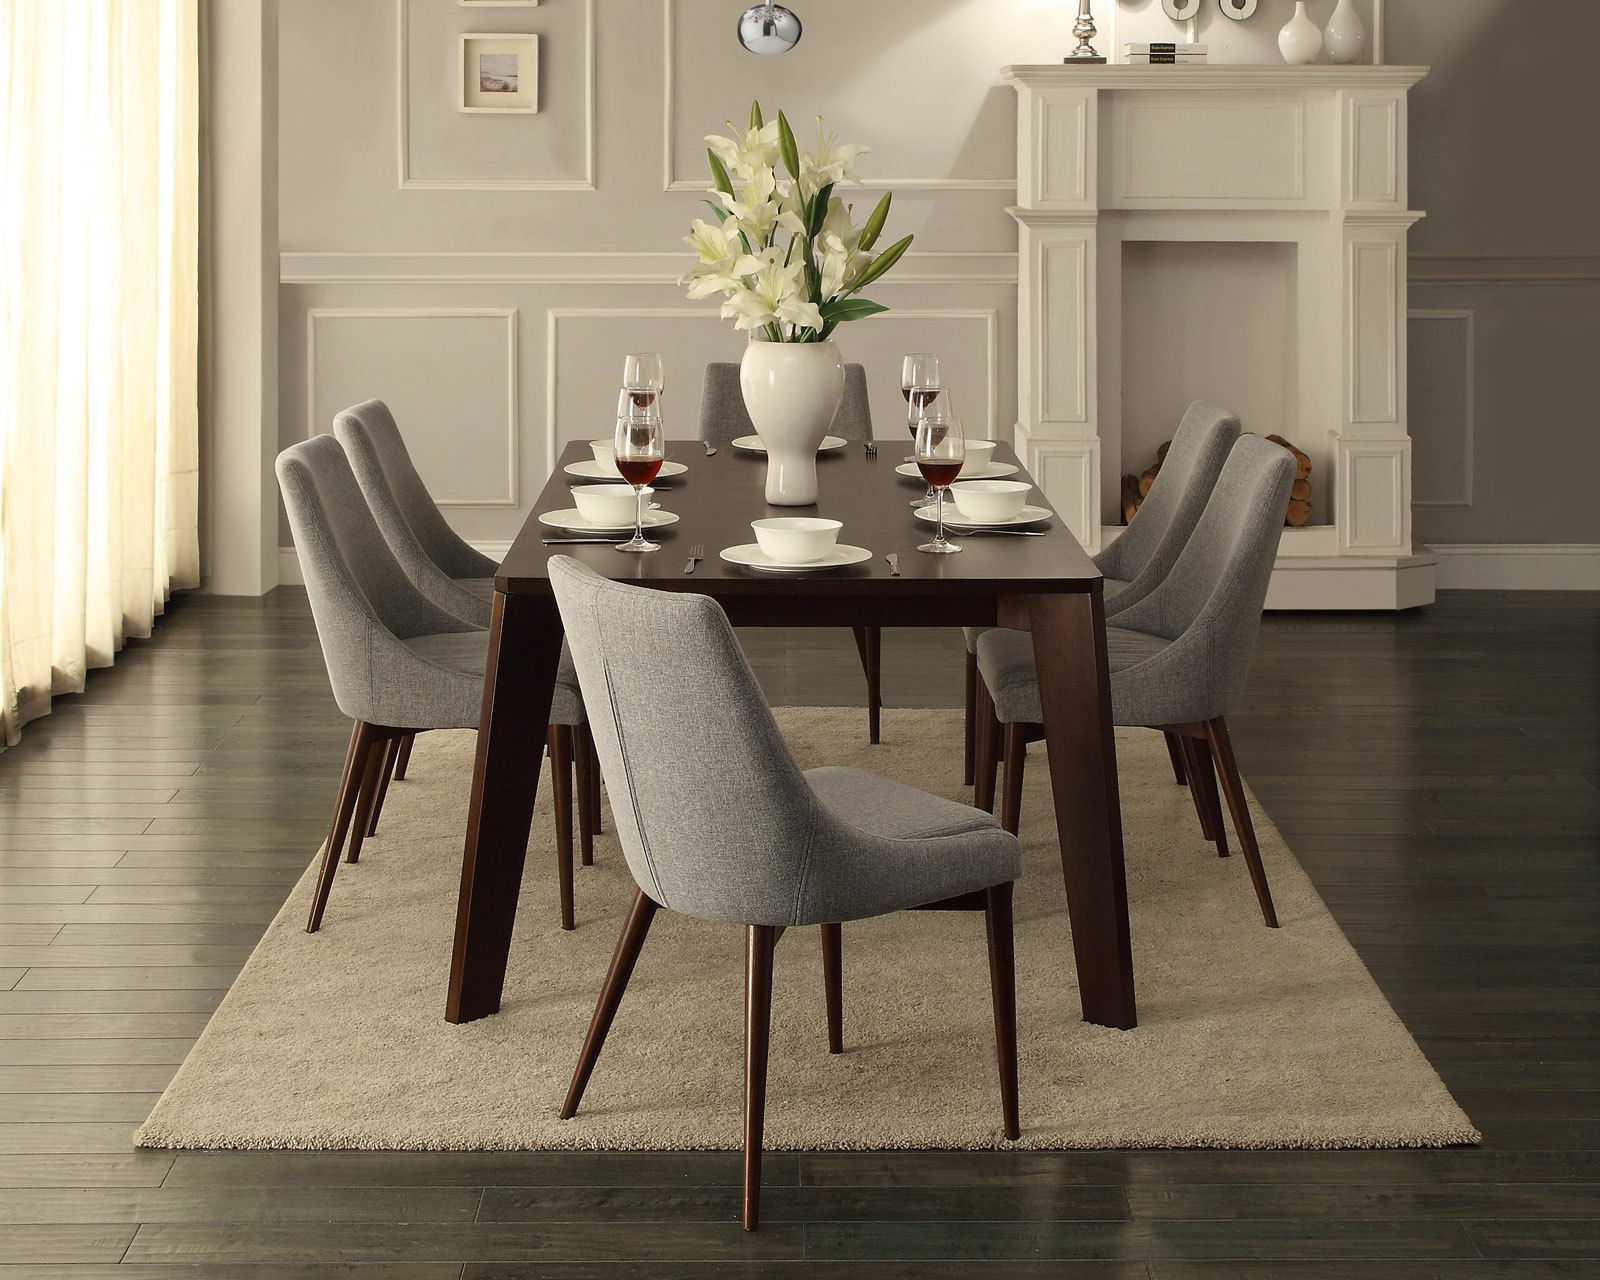 Pictures Of Modern Dining Room Chairs